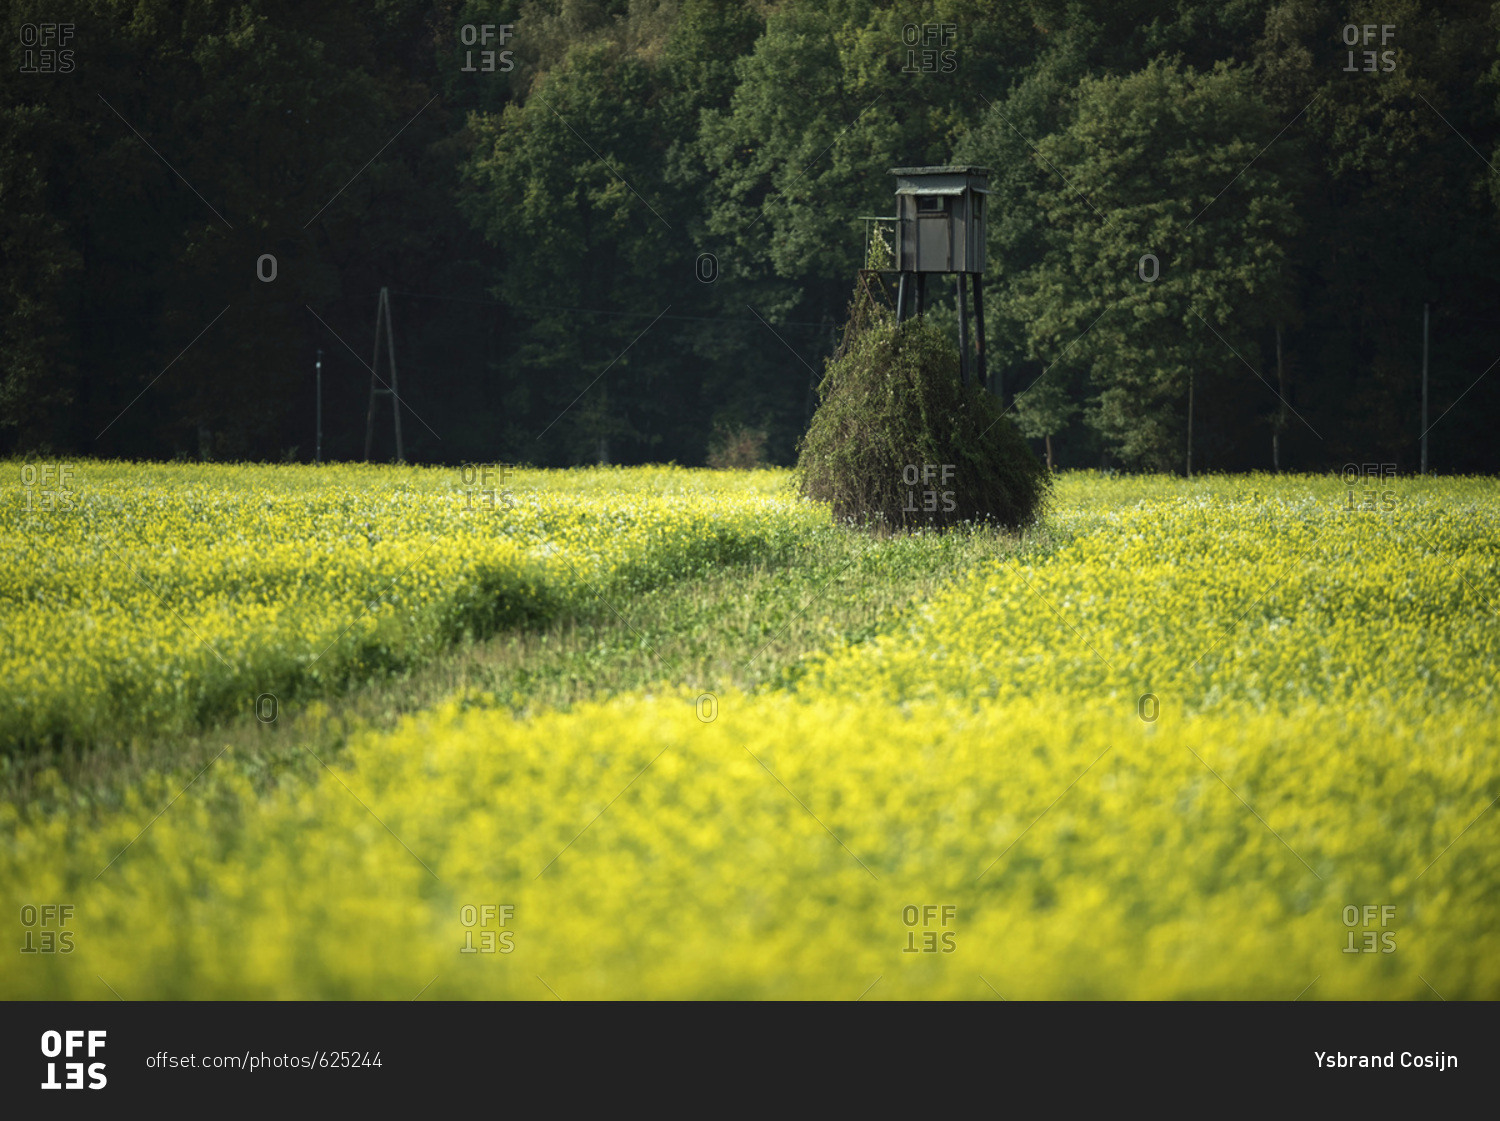 Hunting post in field with yellow flowers